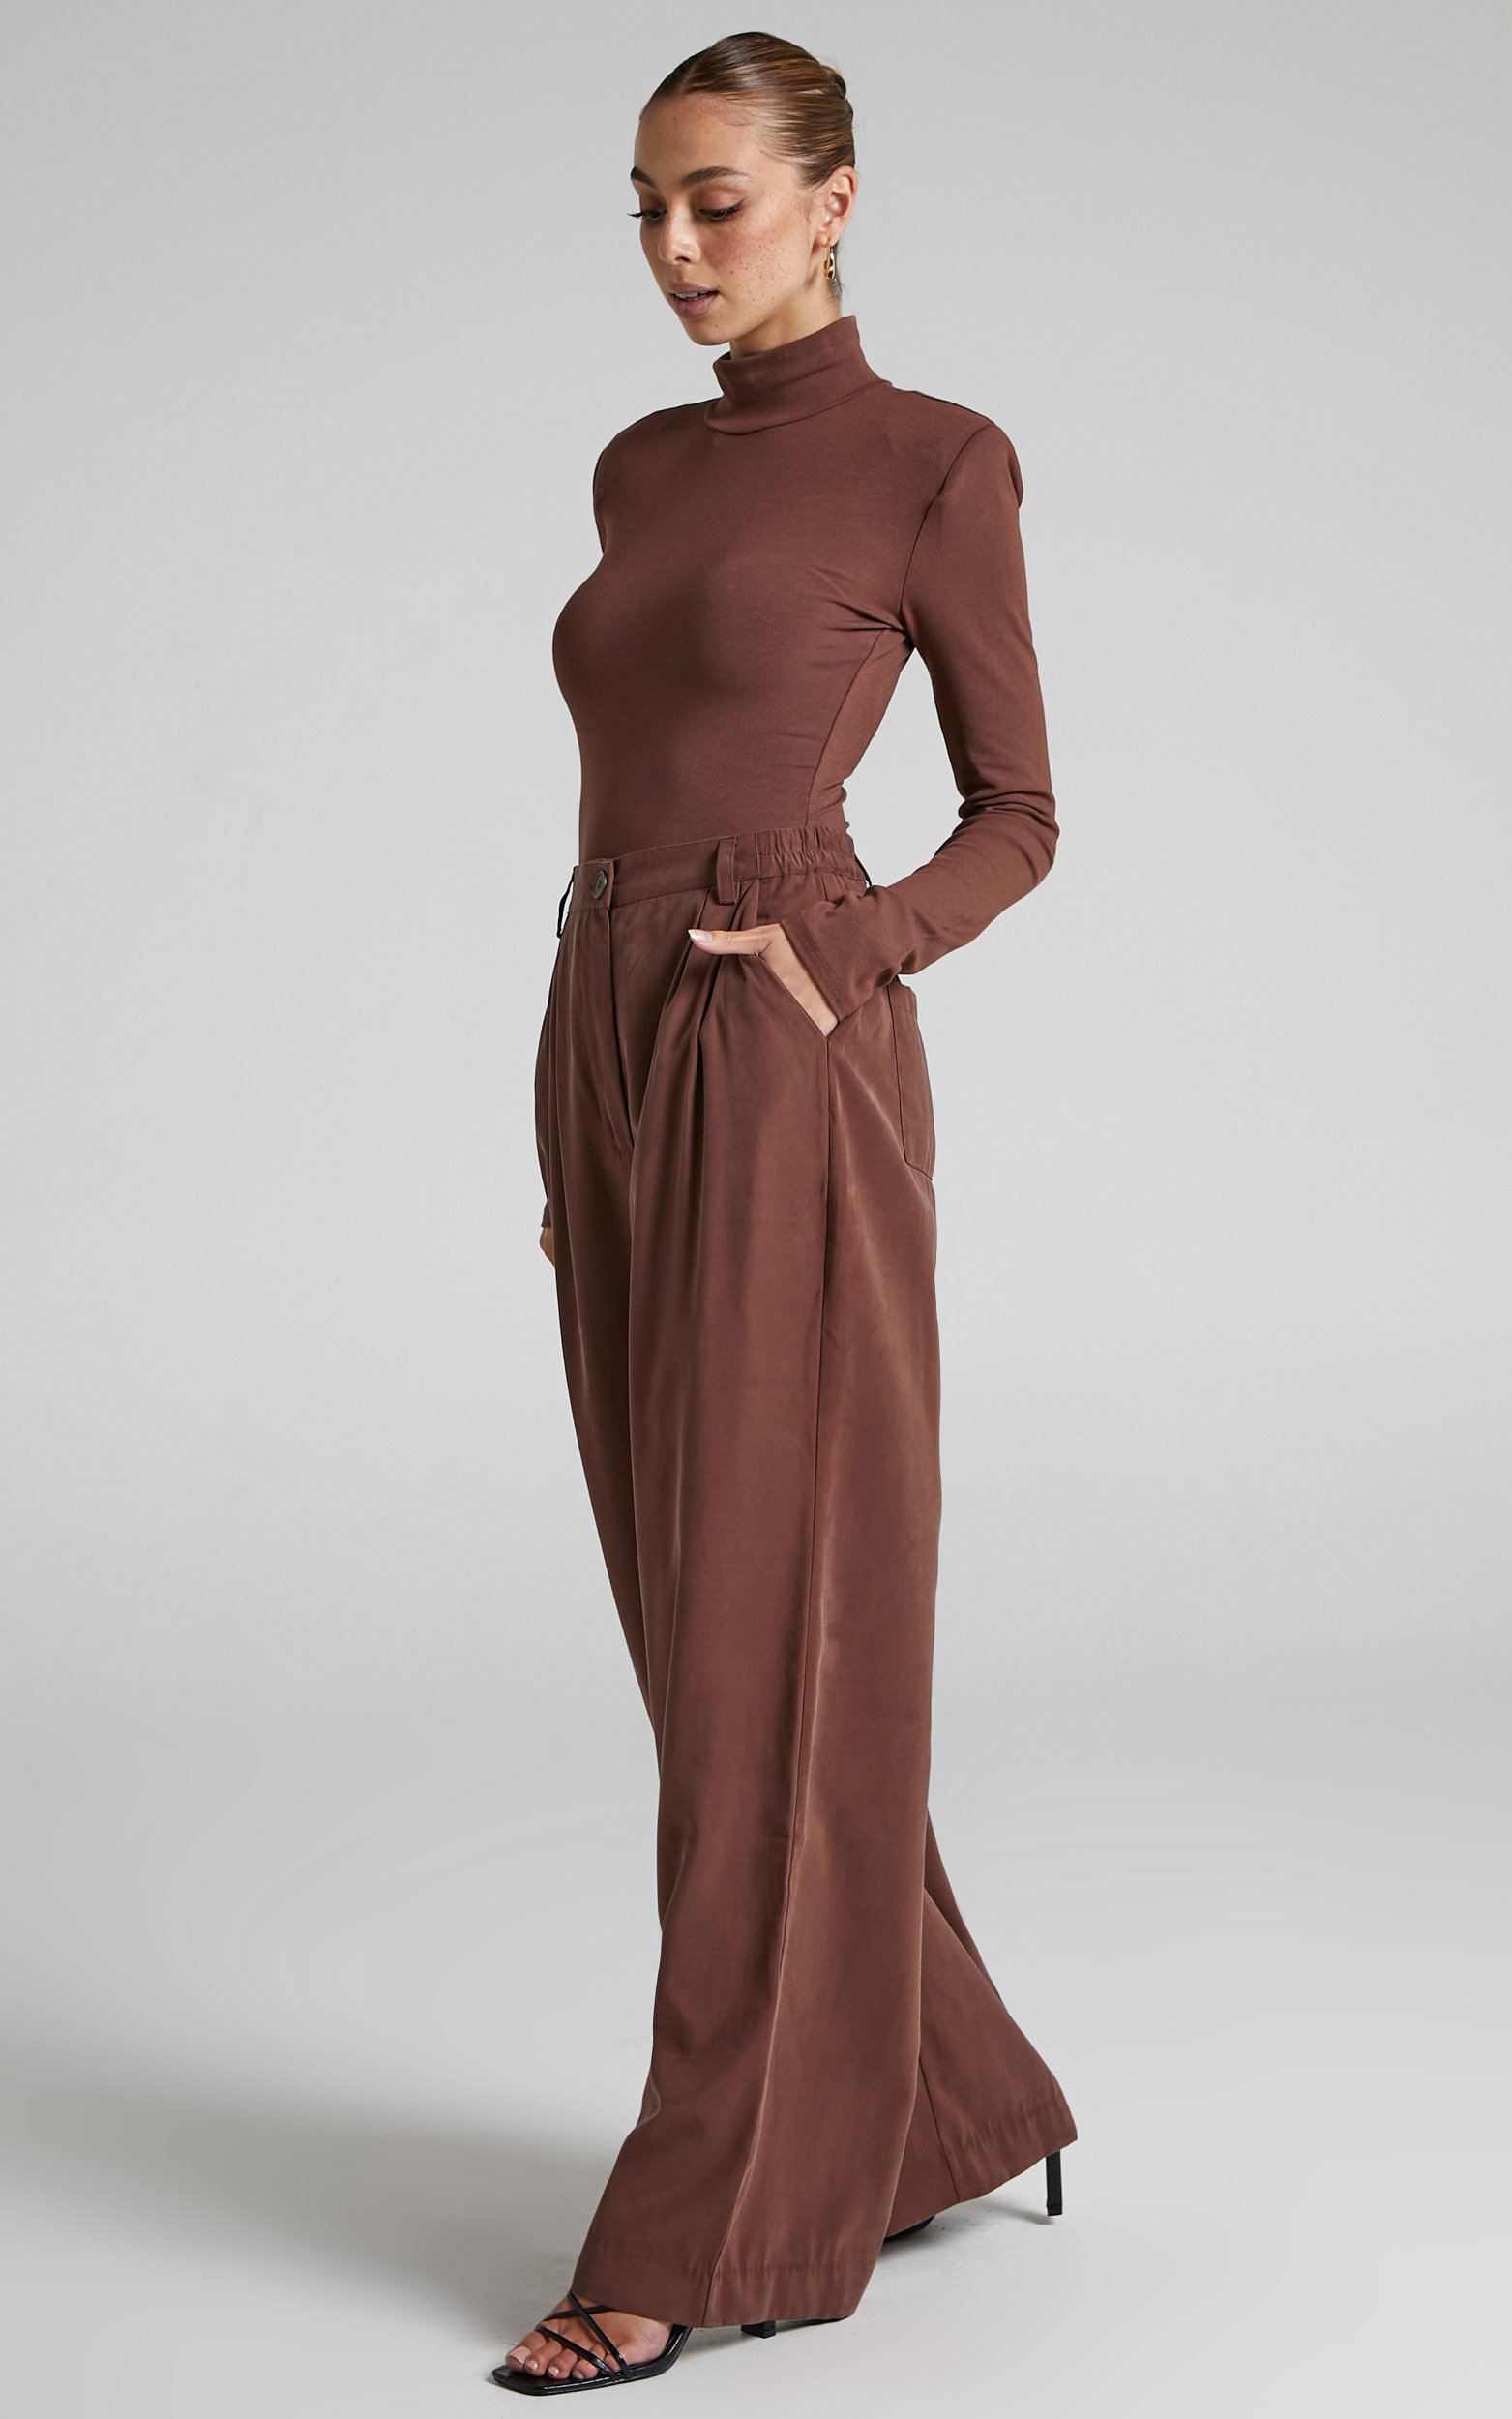 Danielle Bernstein - High Rise Cinched Waist Pleated Pant in Brown - L, BRN1, hi-res image number null